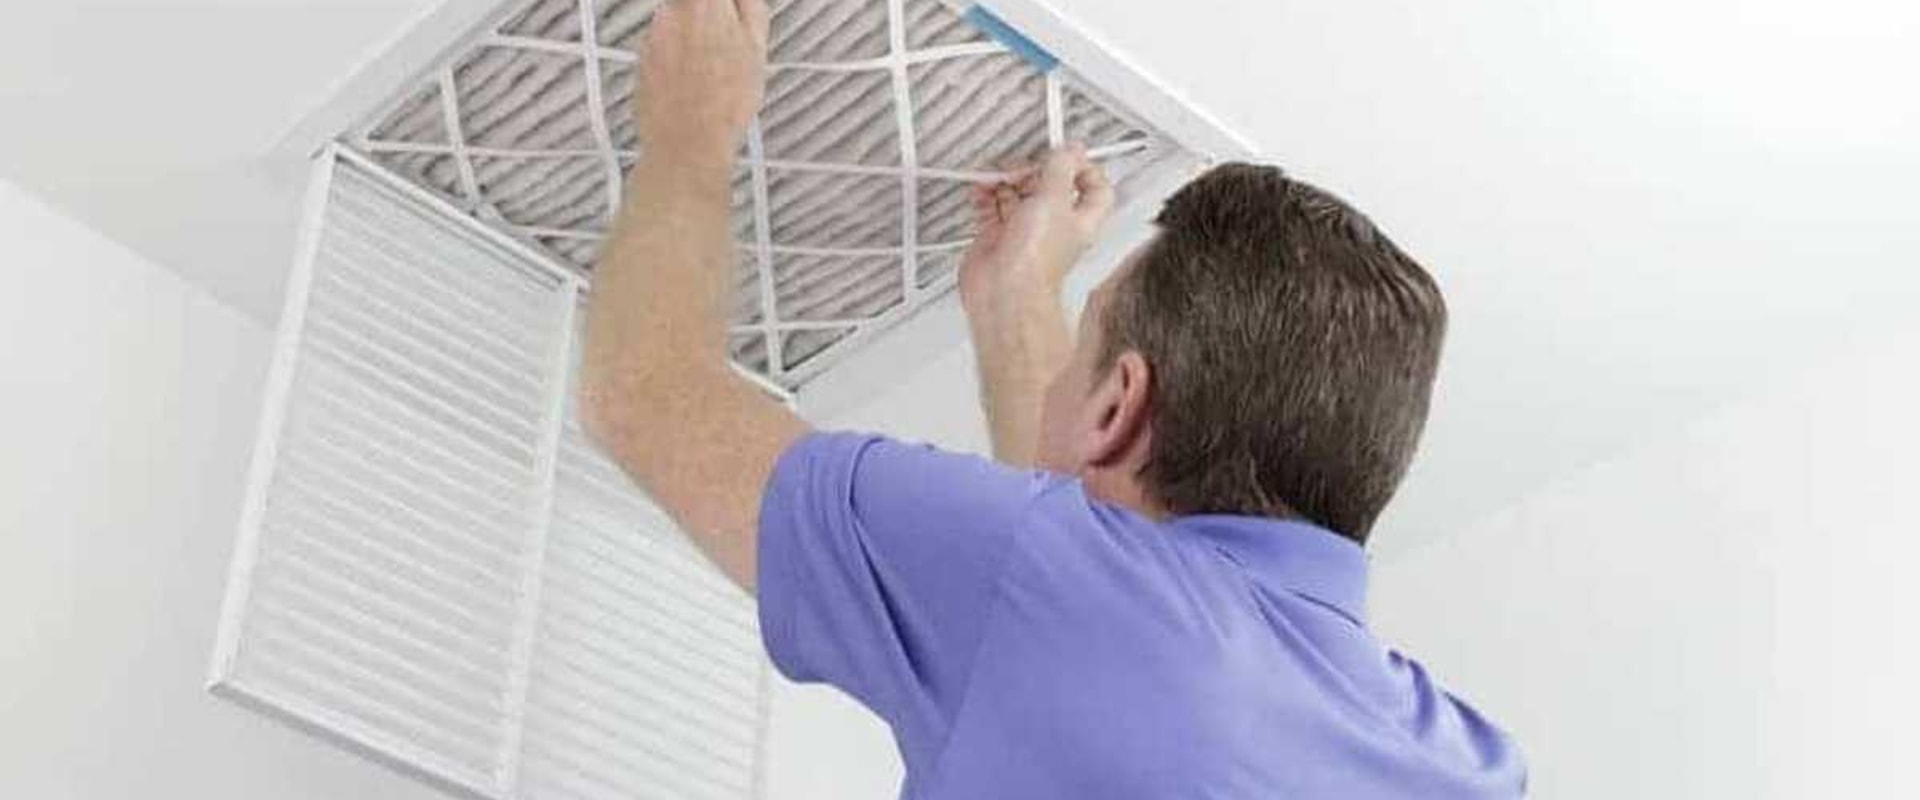 How Often Should You Check Your Furnace or HVAC System Air Filter?